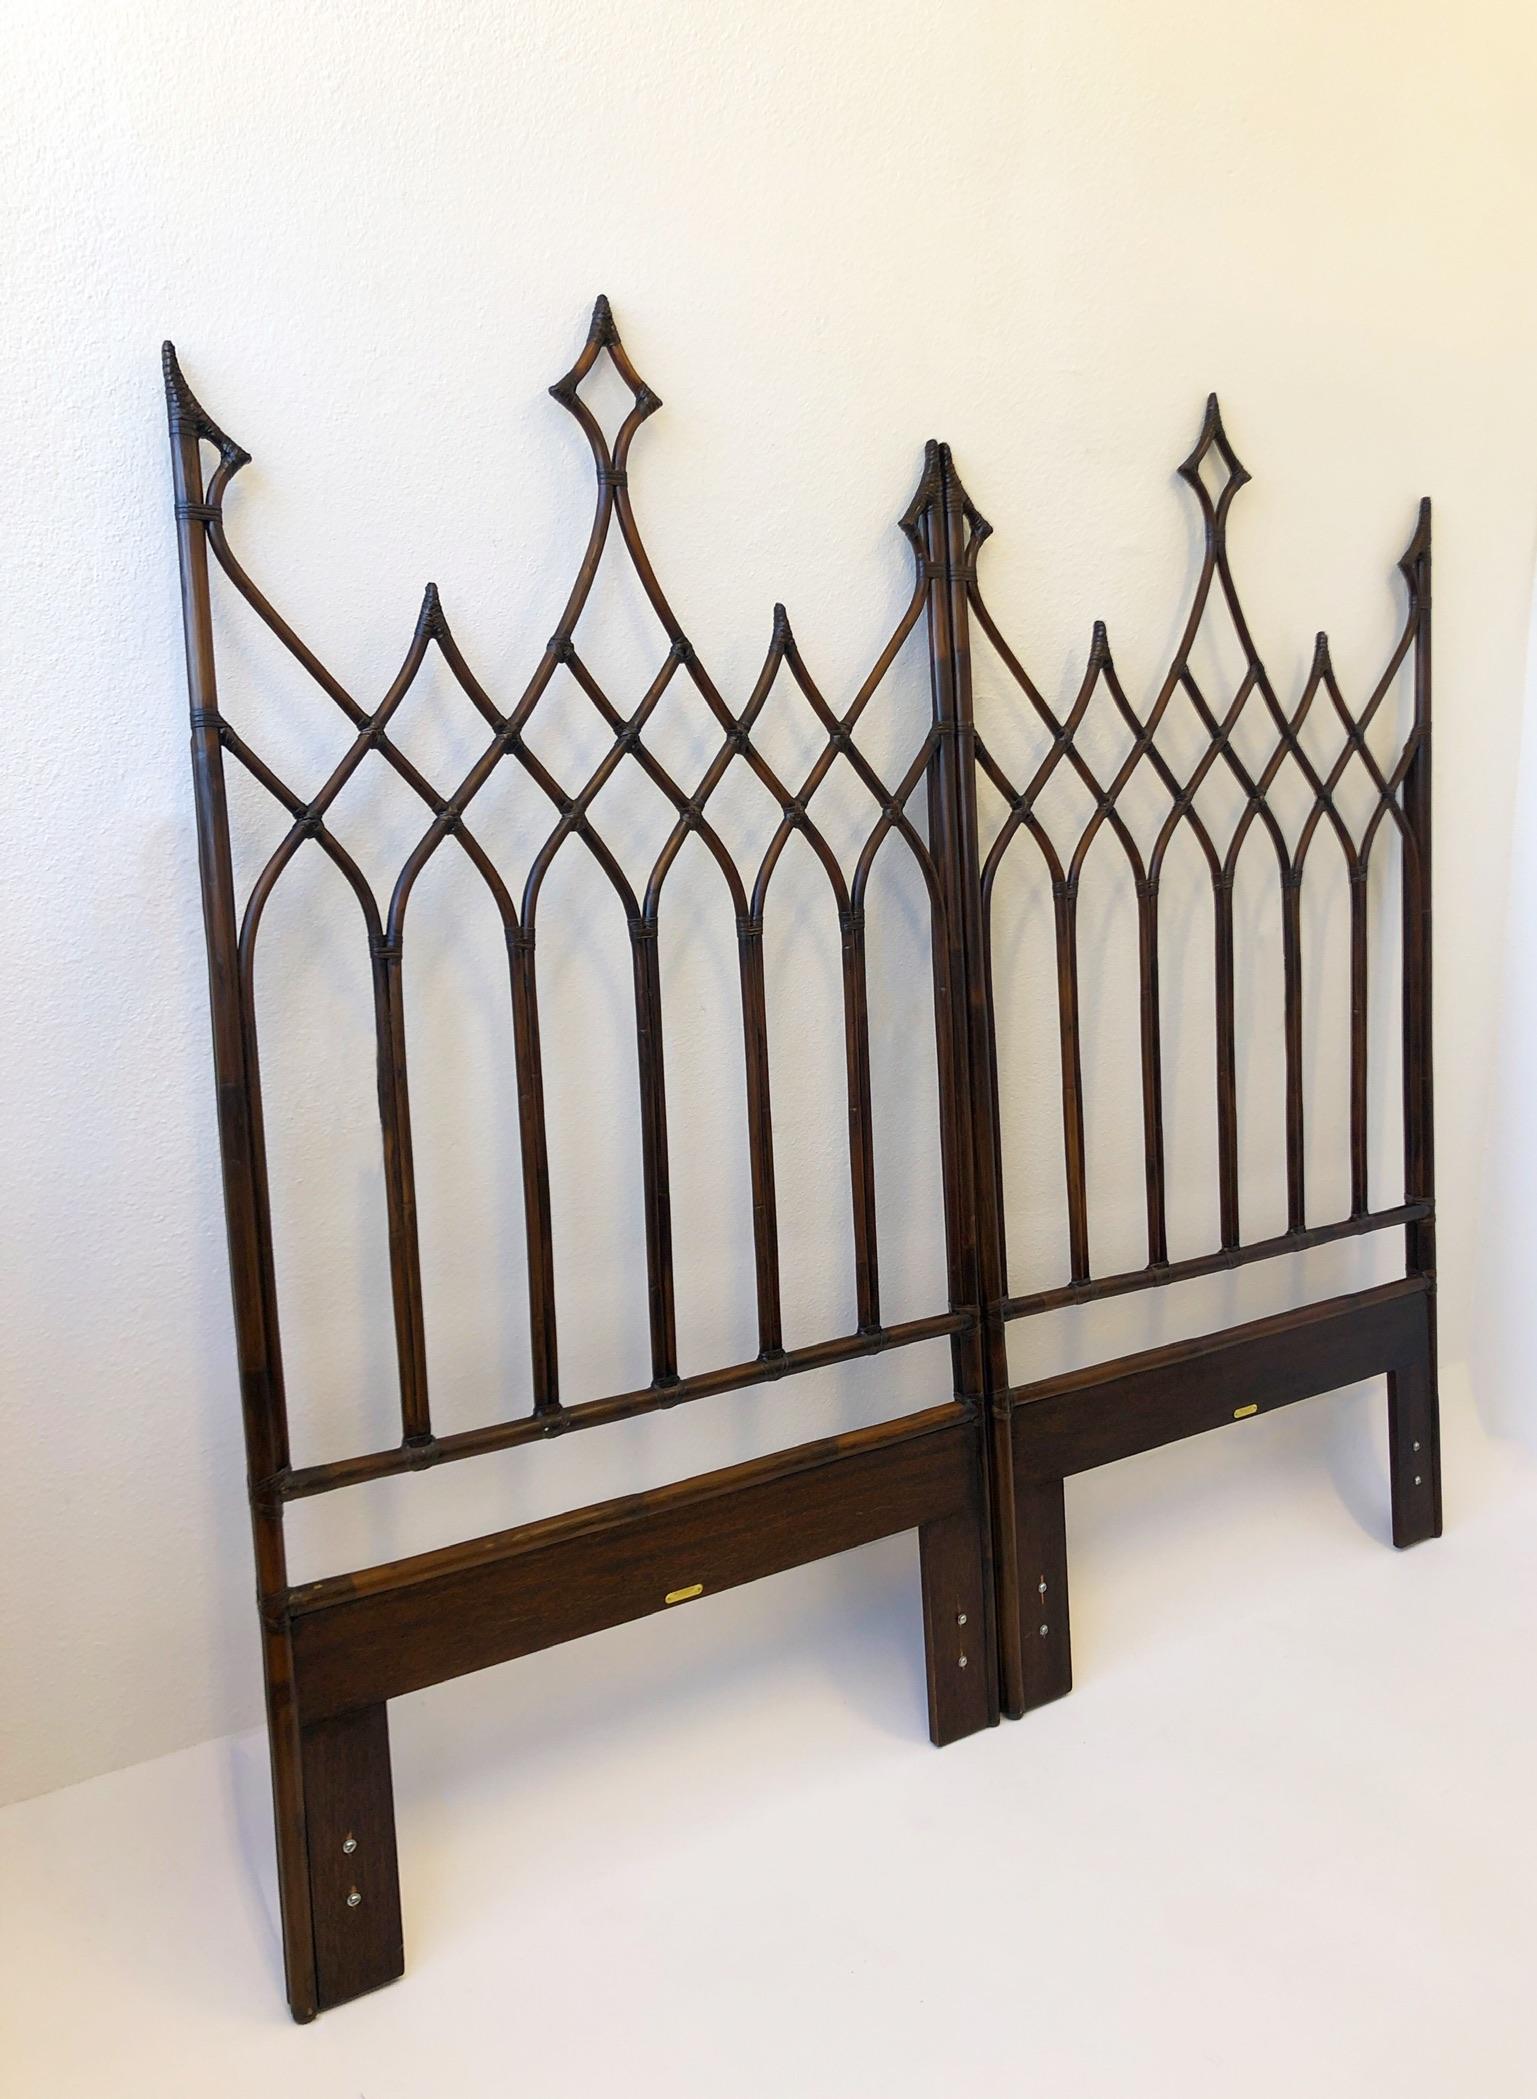 1970s pair of Gothic Revival twin headboards by McGuire of San Francisco. 
Constructed of Bamboo and rawhide finished with a dark stain. 
Excellent vintage condition. 
Measurements: 41.75” Wide, 2.25” Deep and 77” High.